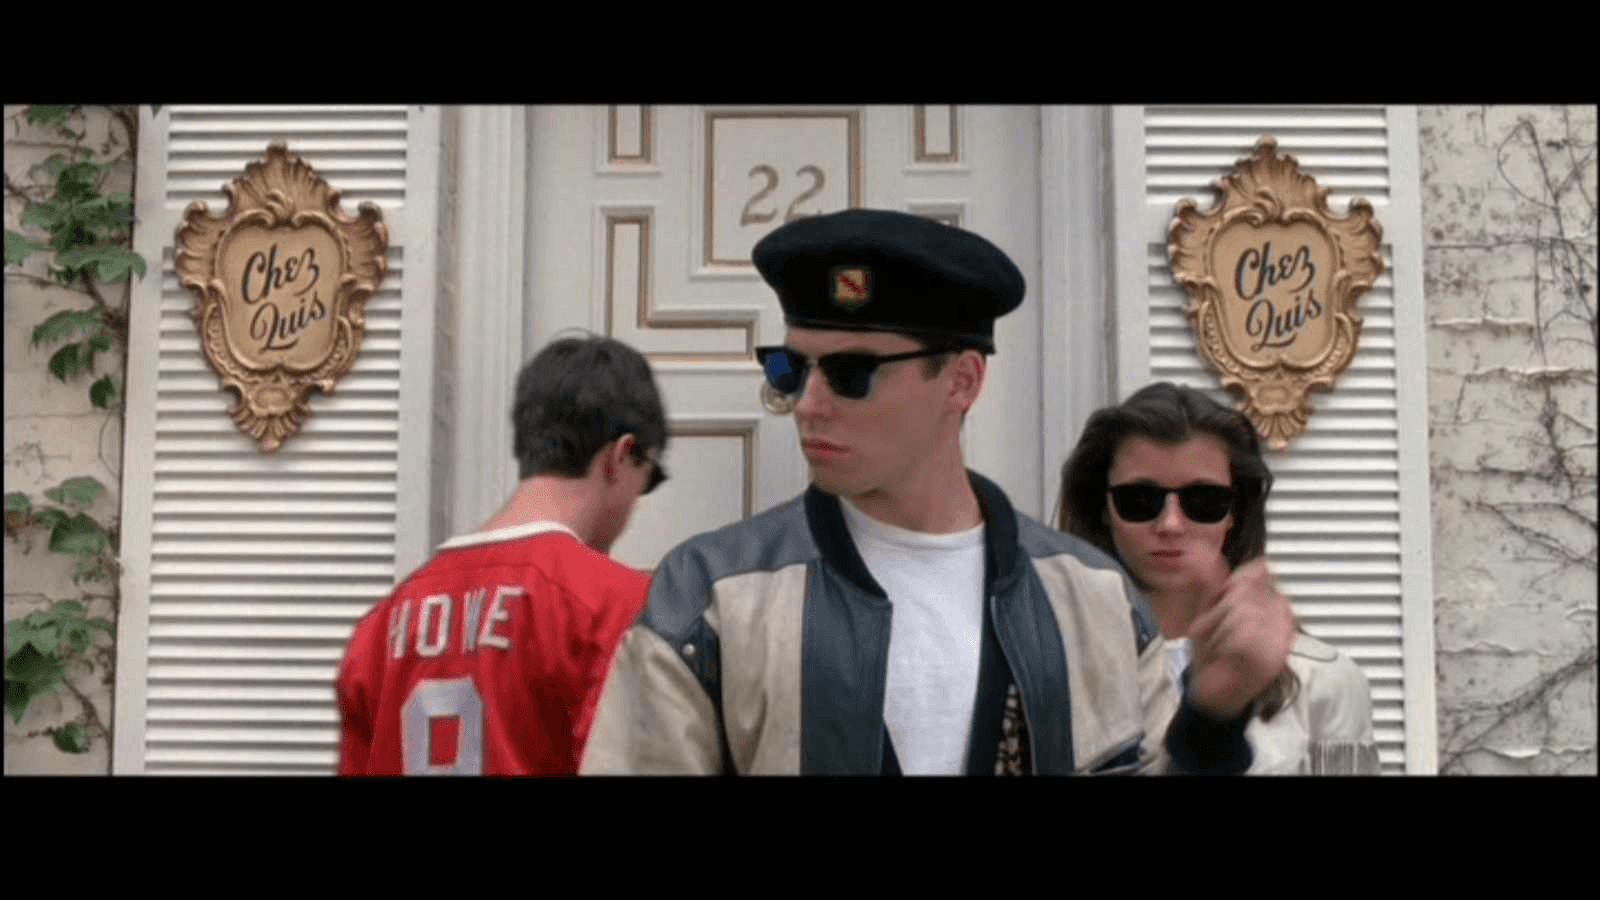 Ferris Bueller’s Day Off Wallpaper Farris 2K wallpapers and backgrounds